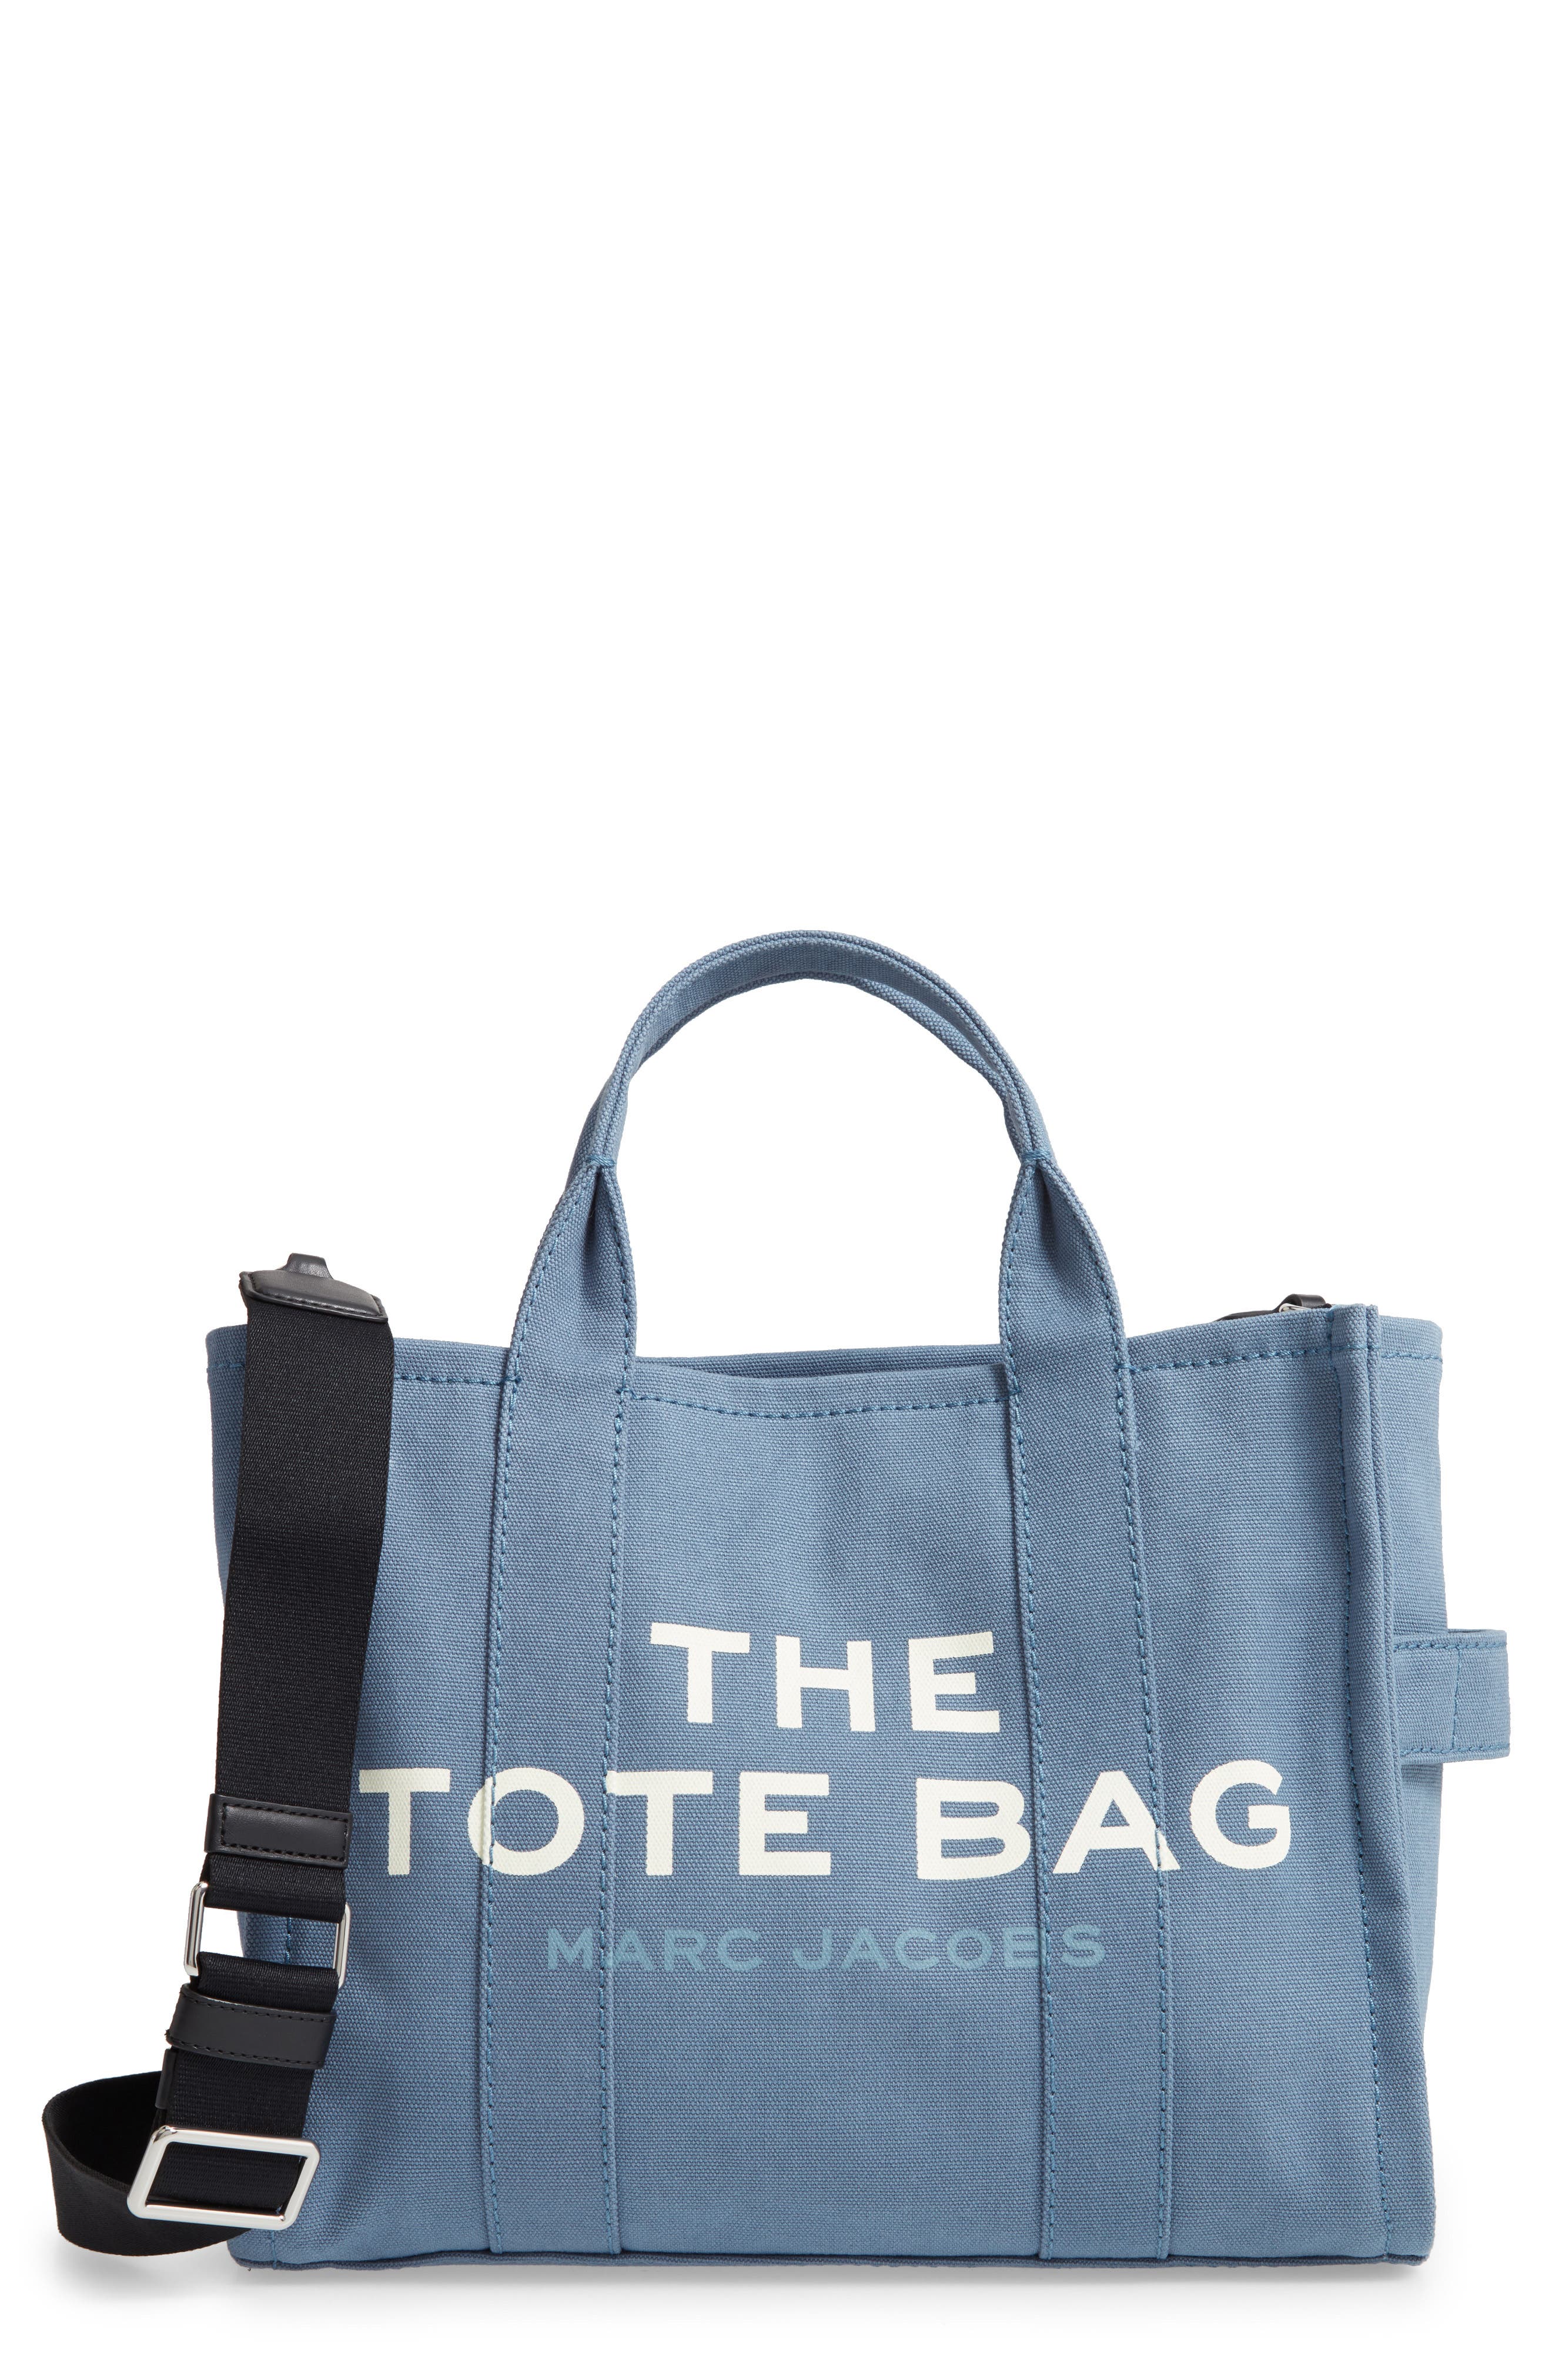 tote with pockets women's blue tote bag Women's Tote Bag Beautiful Blue design work tote blue tote bag for any occasion women's gift